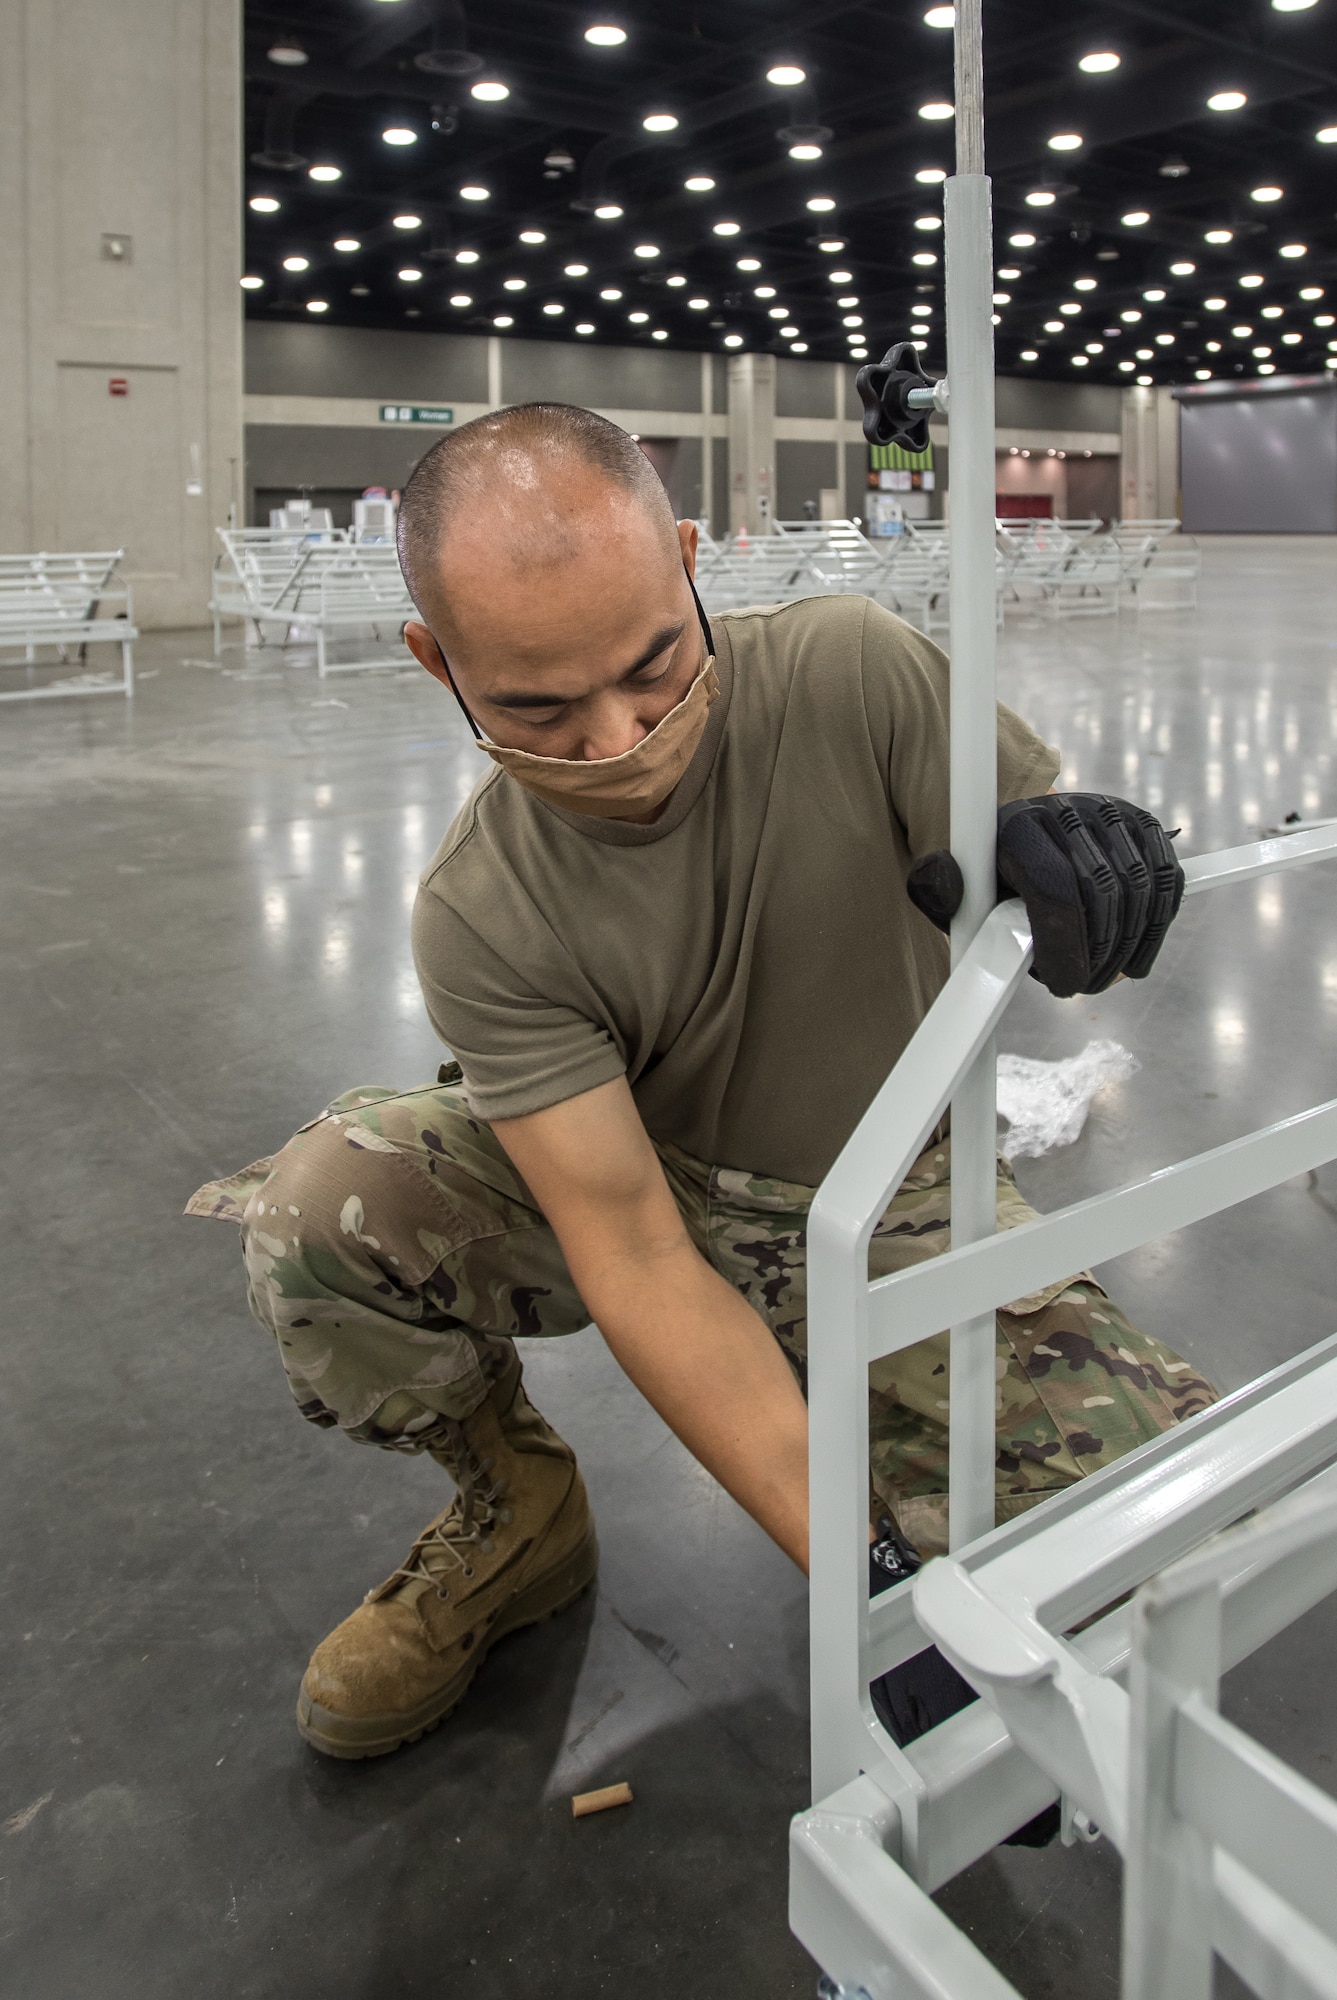 Master Sgt. Bao Huyng of the Kentucky Air National Guard’s 123rd Airlift Wing sets up hospital beds at the Kentucky Fair and Exposition Center in Louisville, Ky., April 11, 2020. The site, which is expected to be operational April 15, will serve as an Alternate Care Facility for patients suffering from COVID-19 if area hospitals exceed available capacity. The facility initially can treat up to 288 patients and is scalable to 2,000 beds. (U.S. Air National Guard photo by Dale Greer)